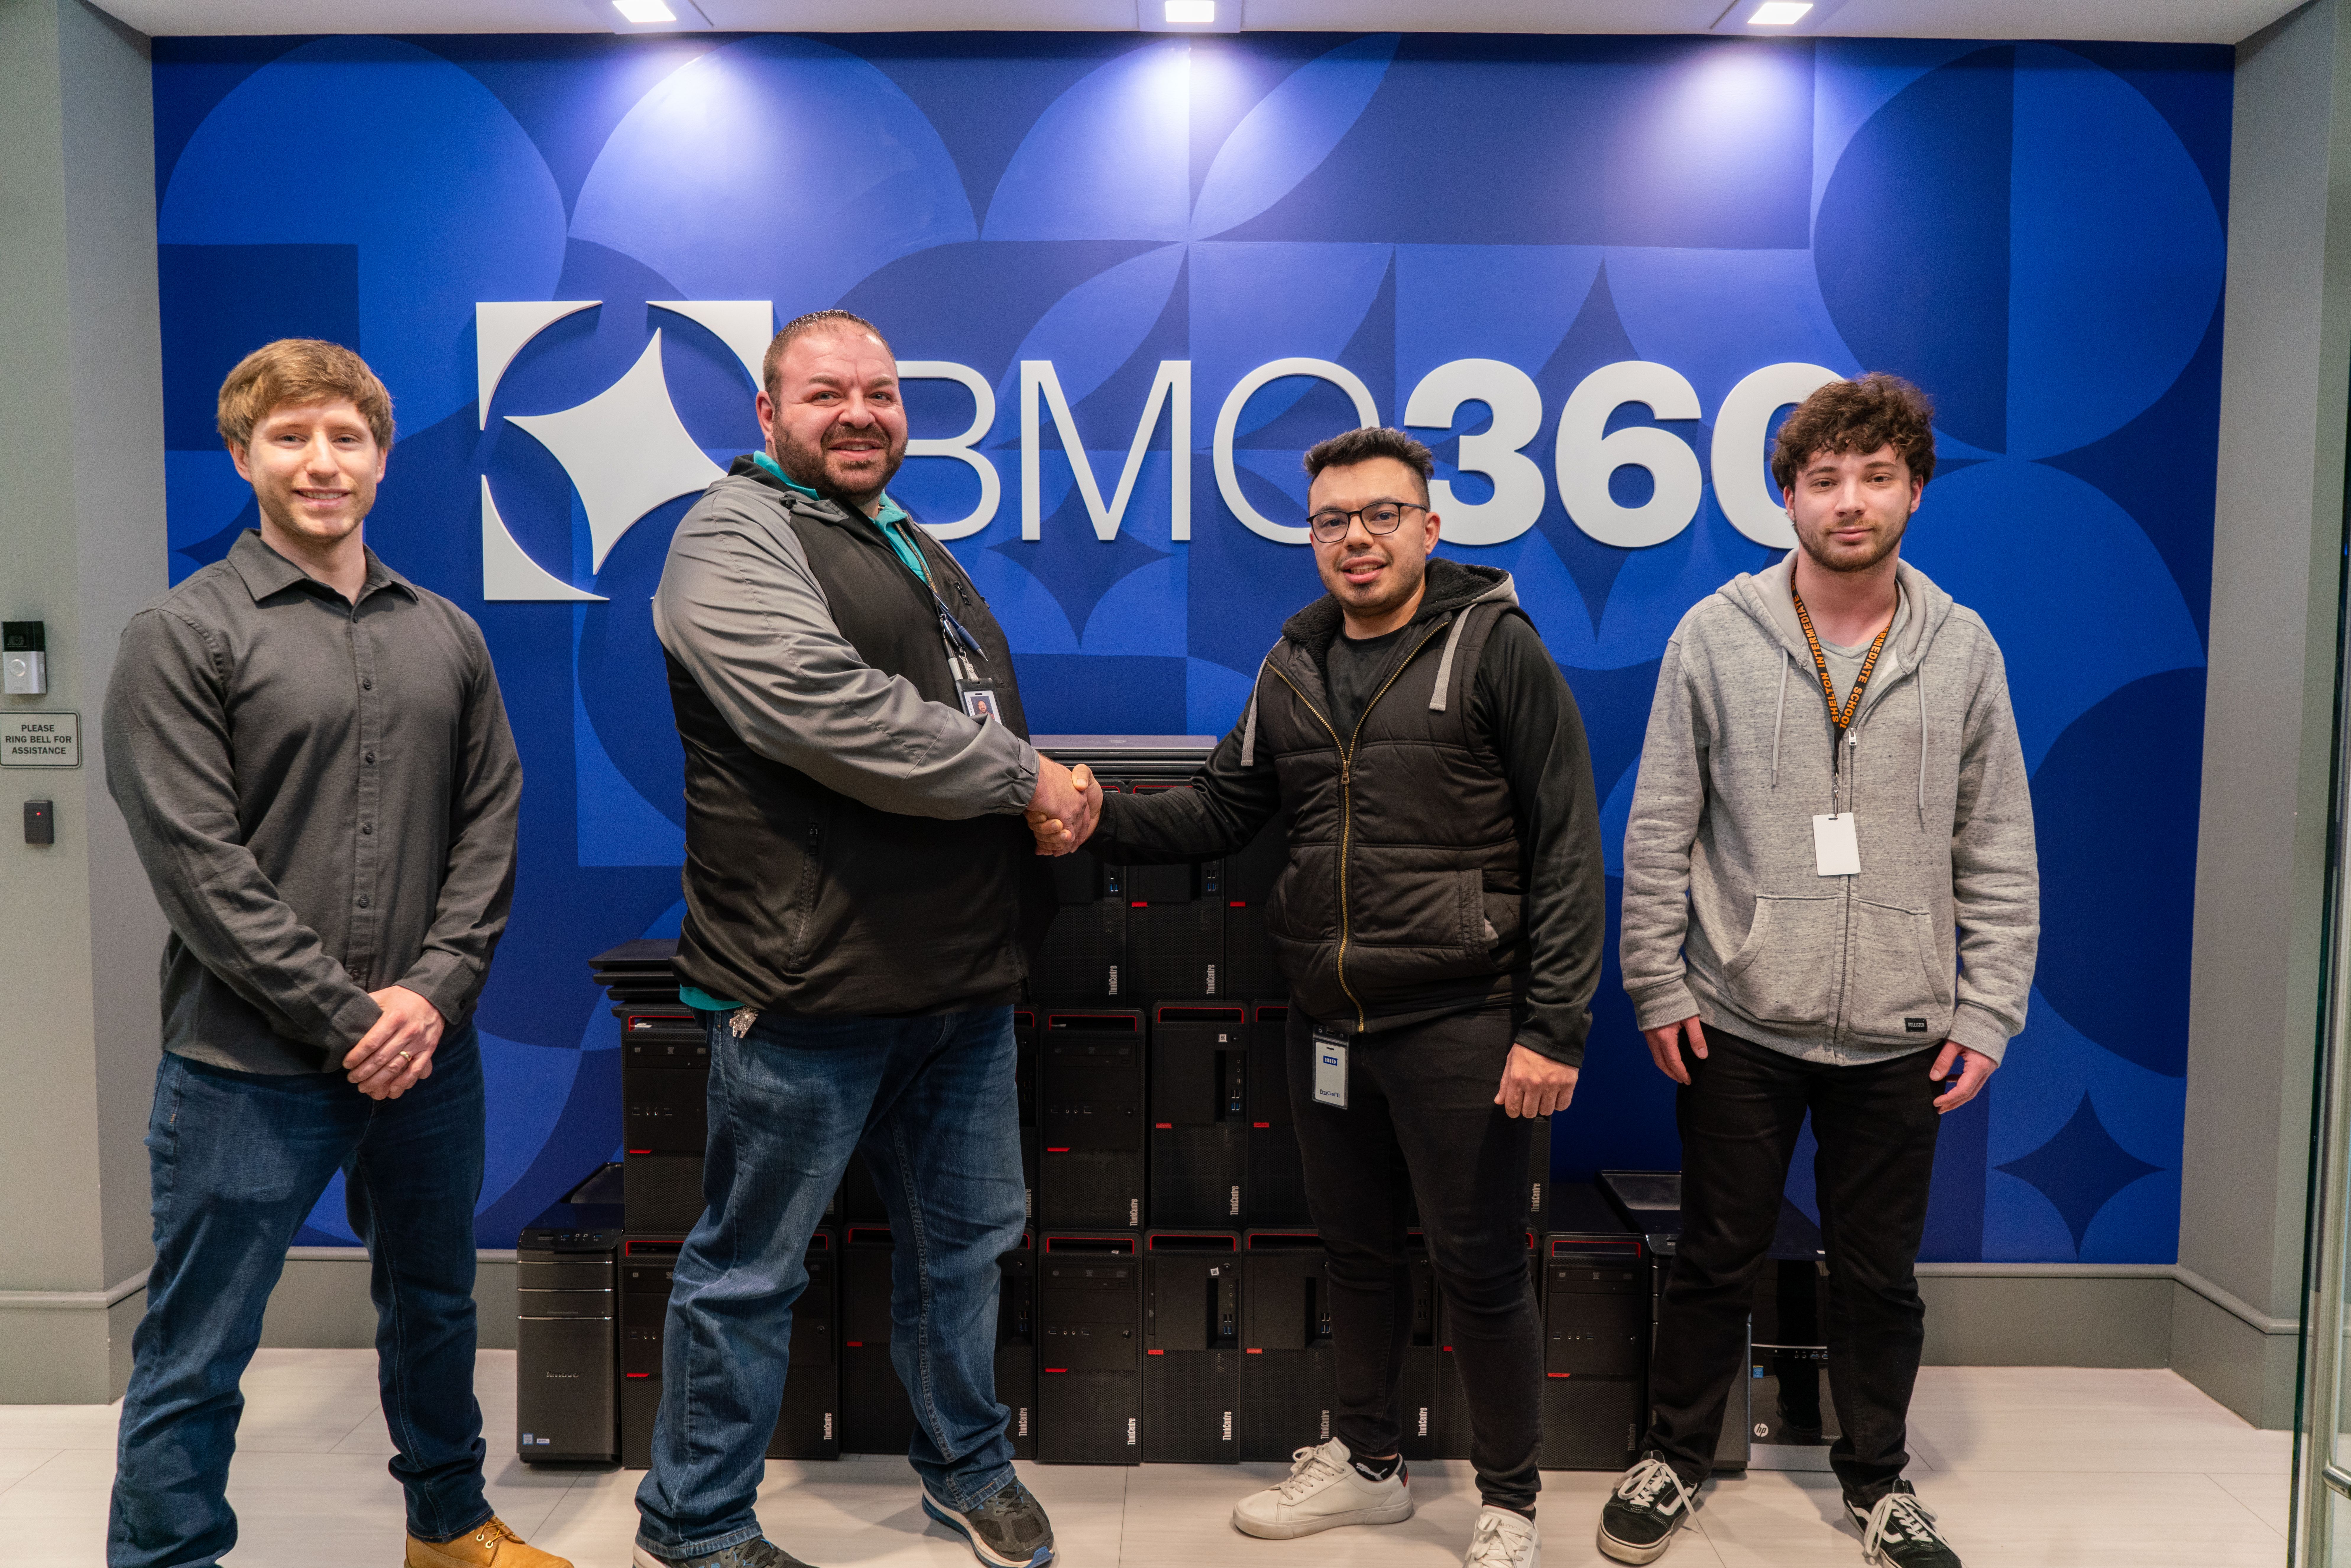 BMG360 IT team donates computers and other tech to Shelton Public Schools